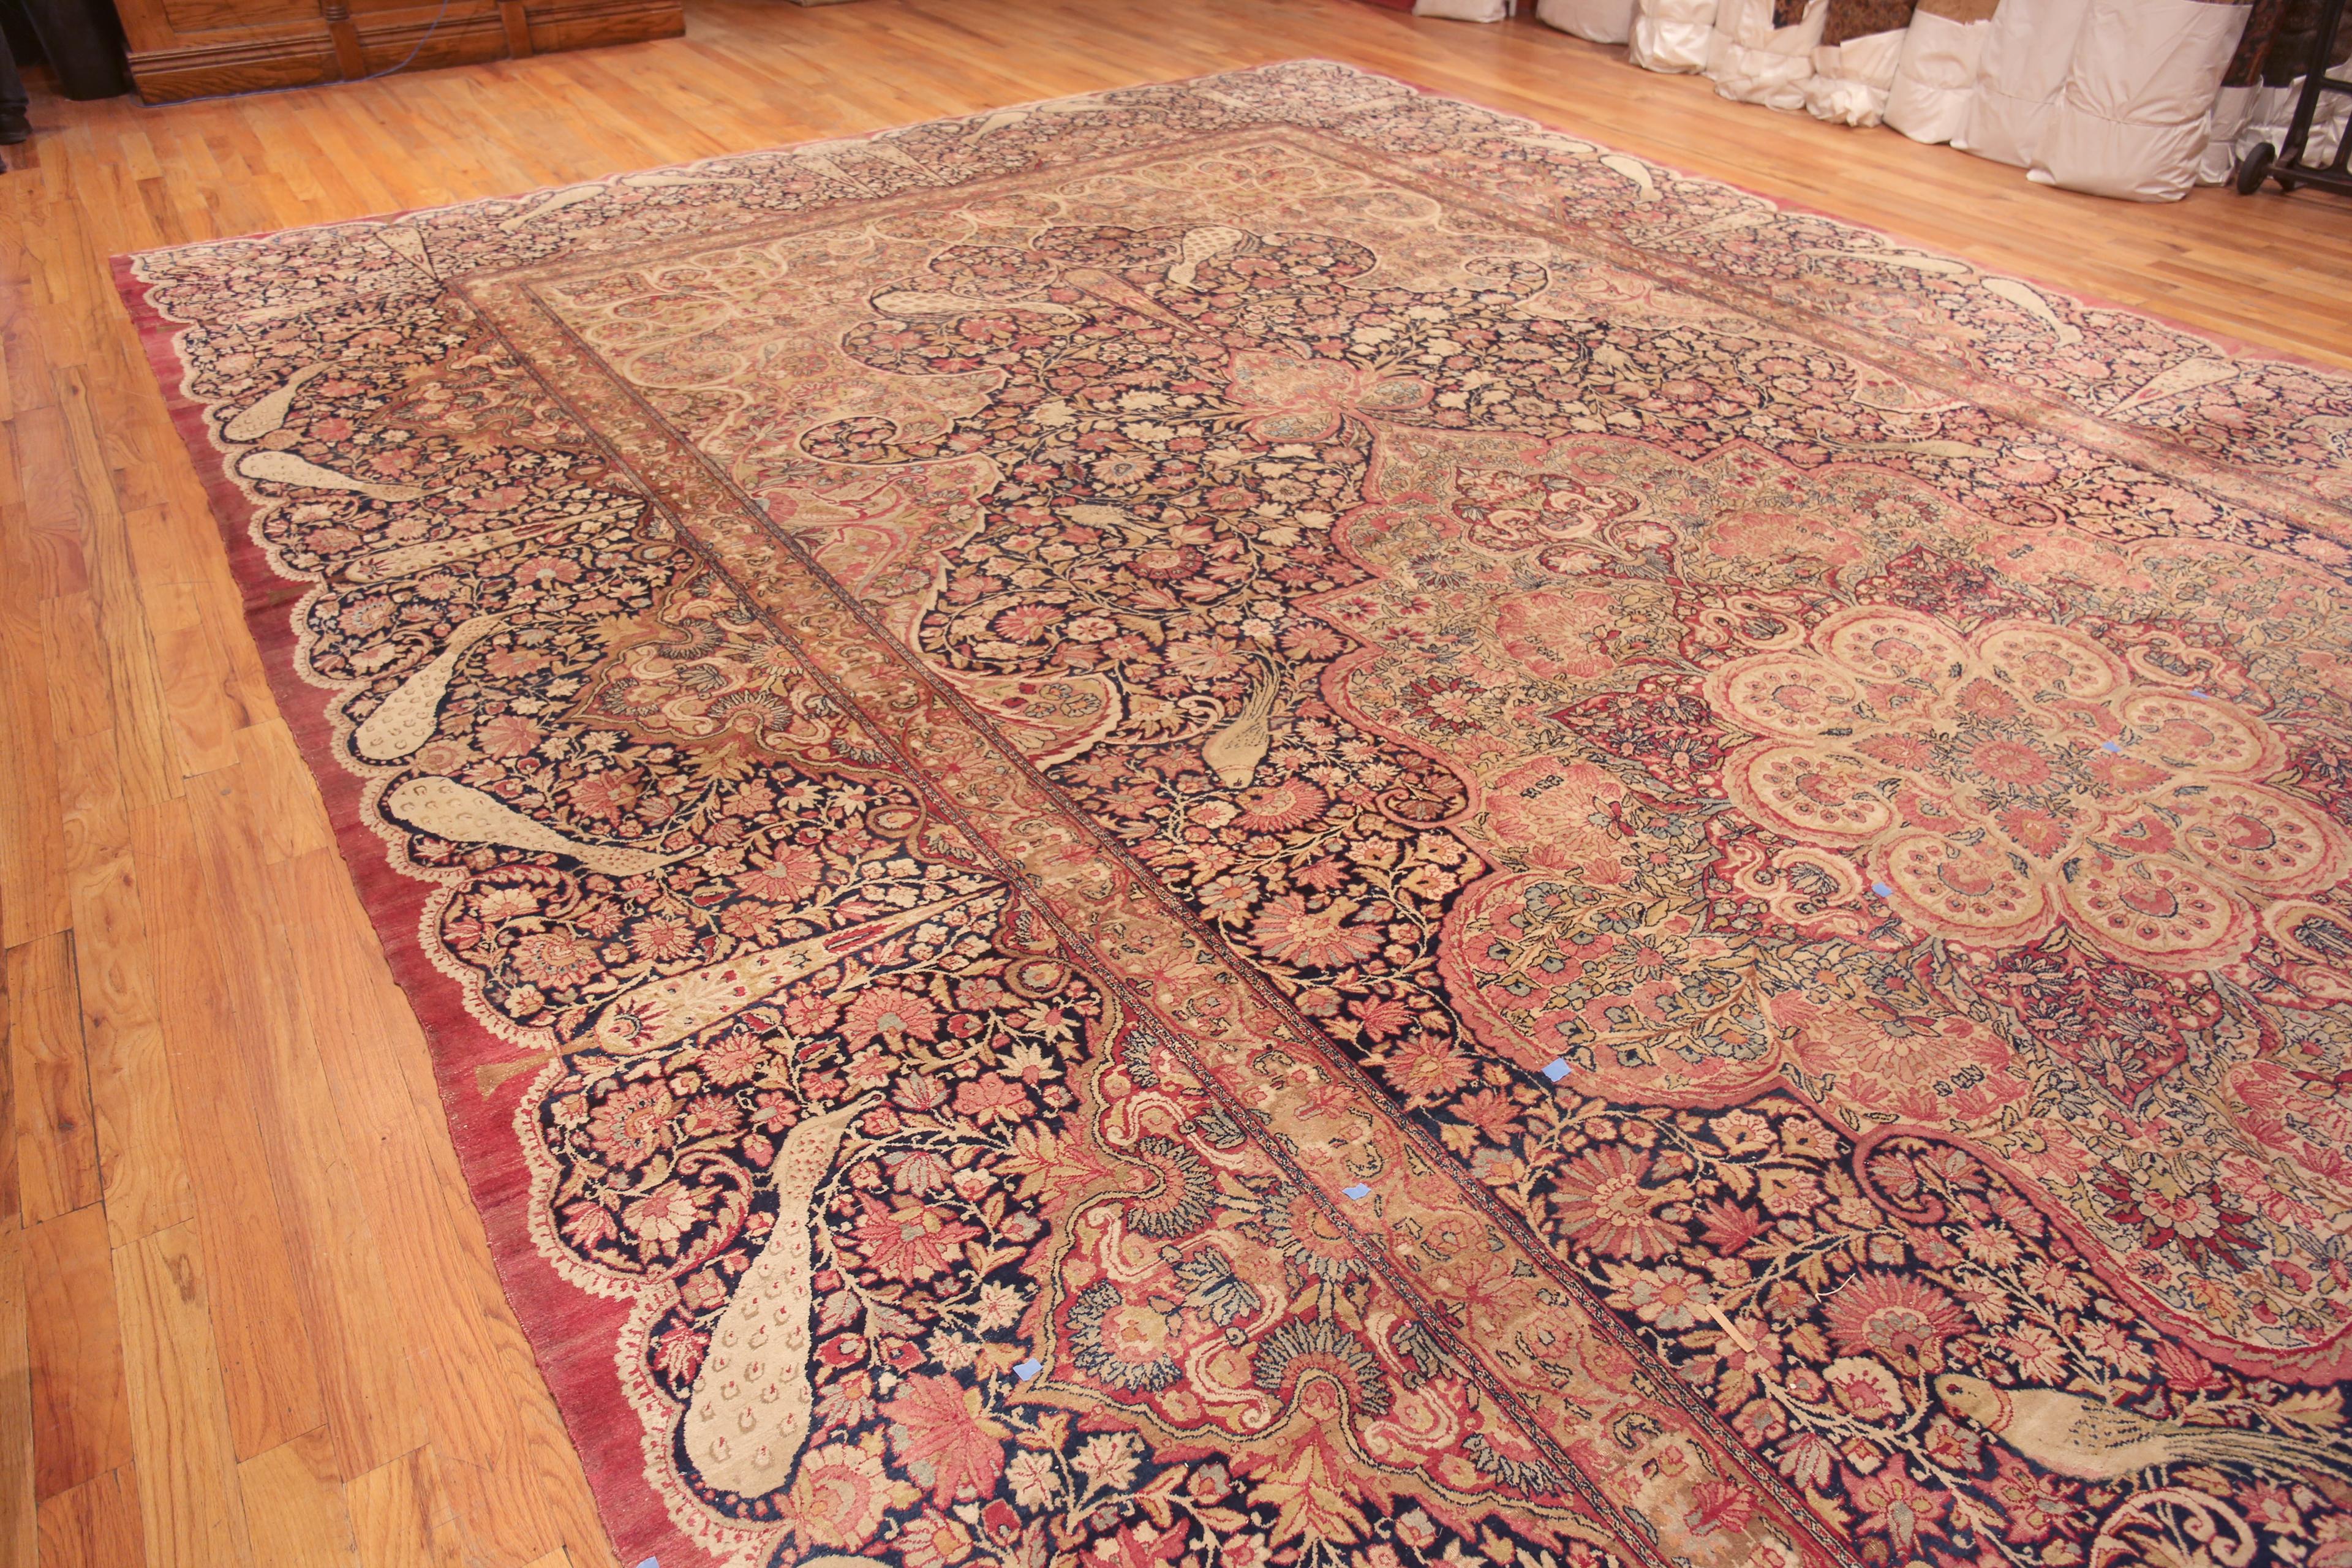 Extremely Fine And Beautiful Floral Animal Design Antique Persian Kerman Rug, Country of Origin / Rug Type: Antique Persian Rug, Circa: Late 19th Century